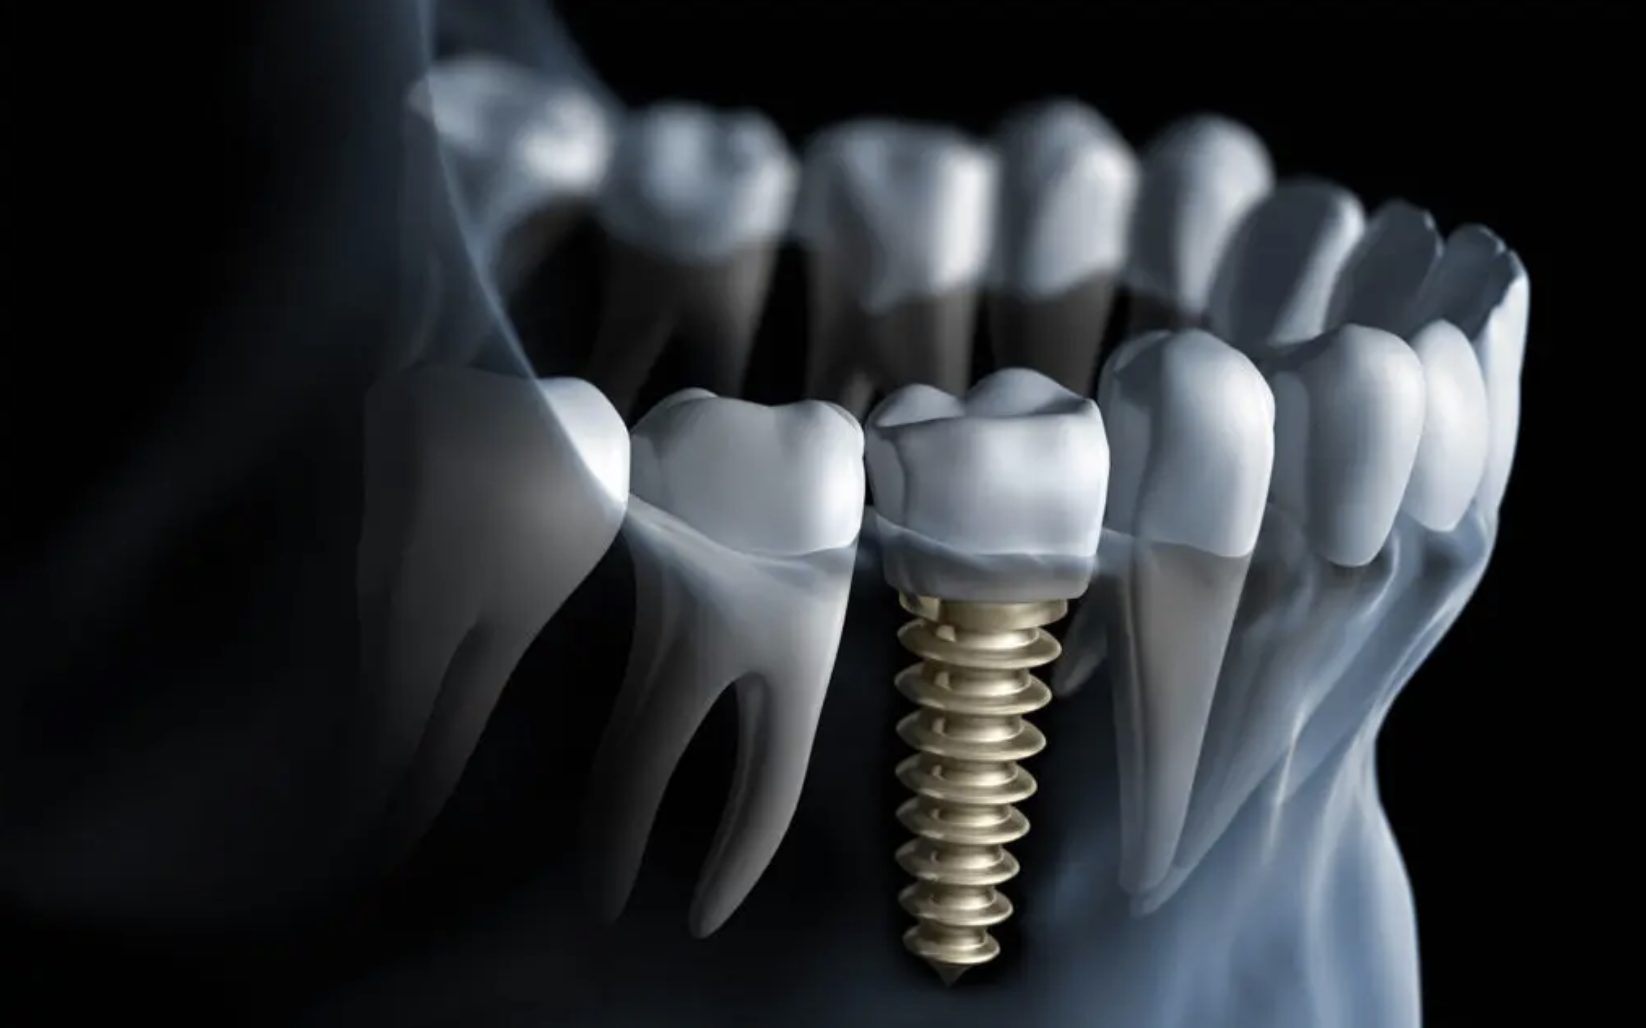 How Can You Keep Your Implant Clean and Hygienic?